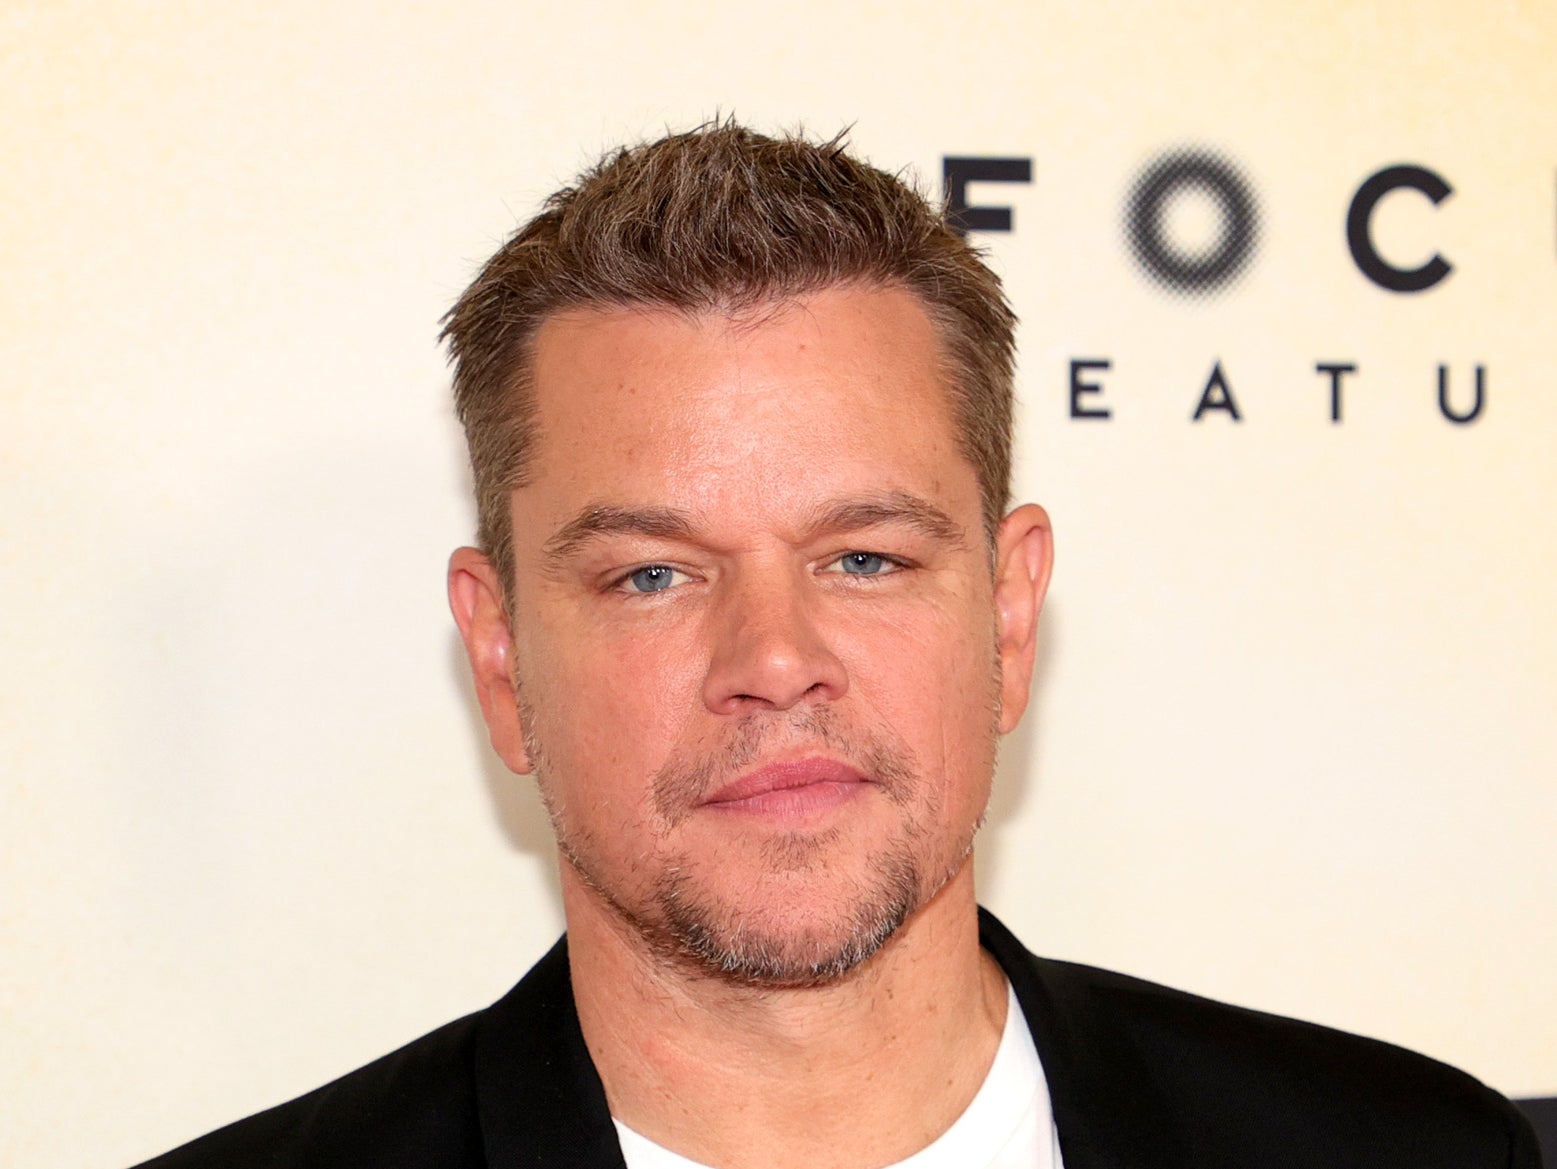 Matt Damon will appear in a community performance to raise money for the historical building